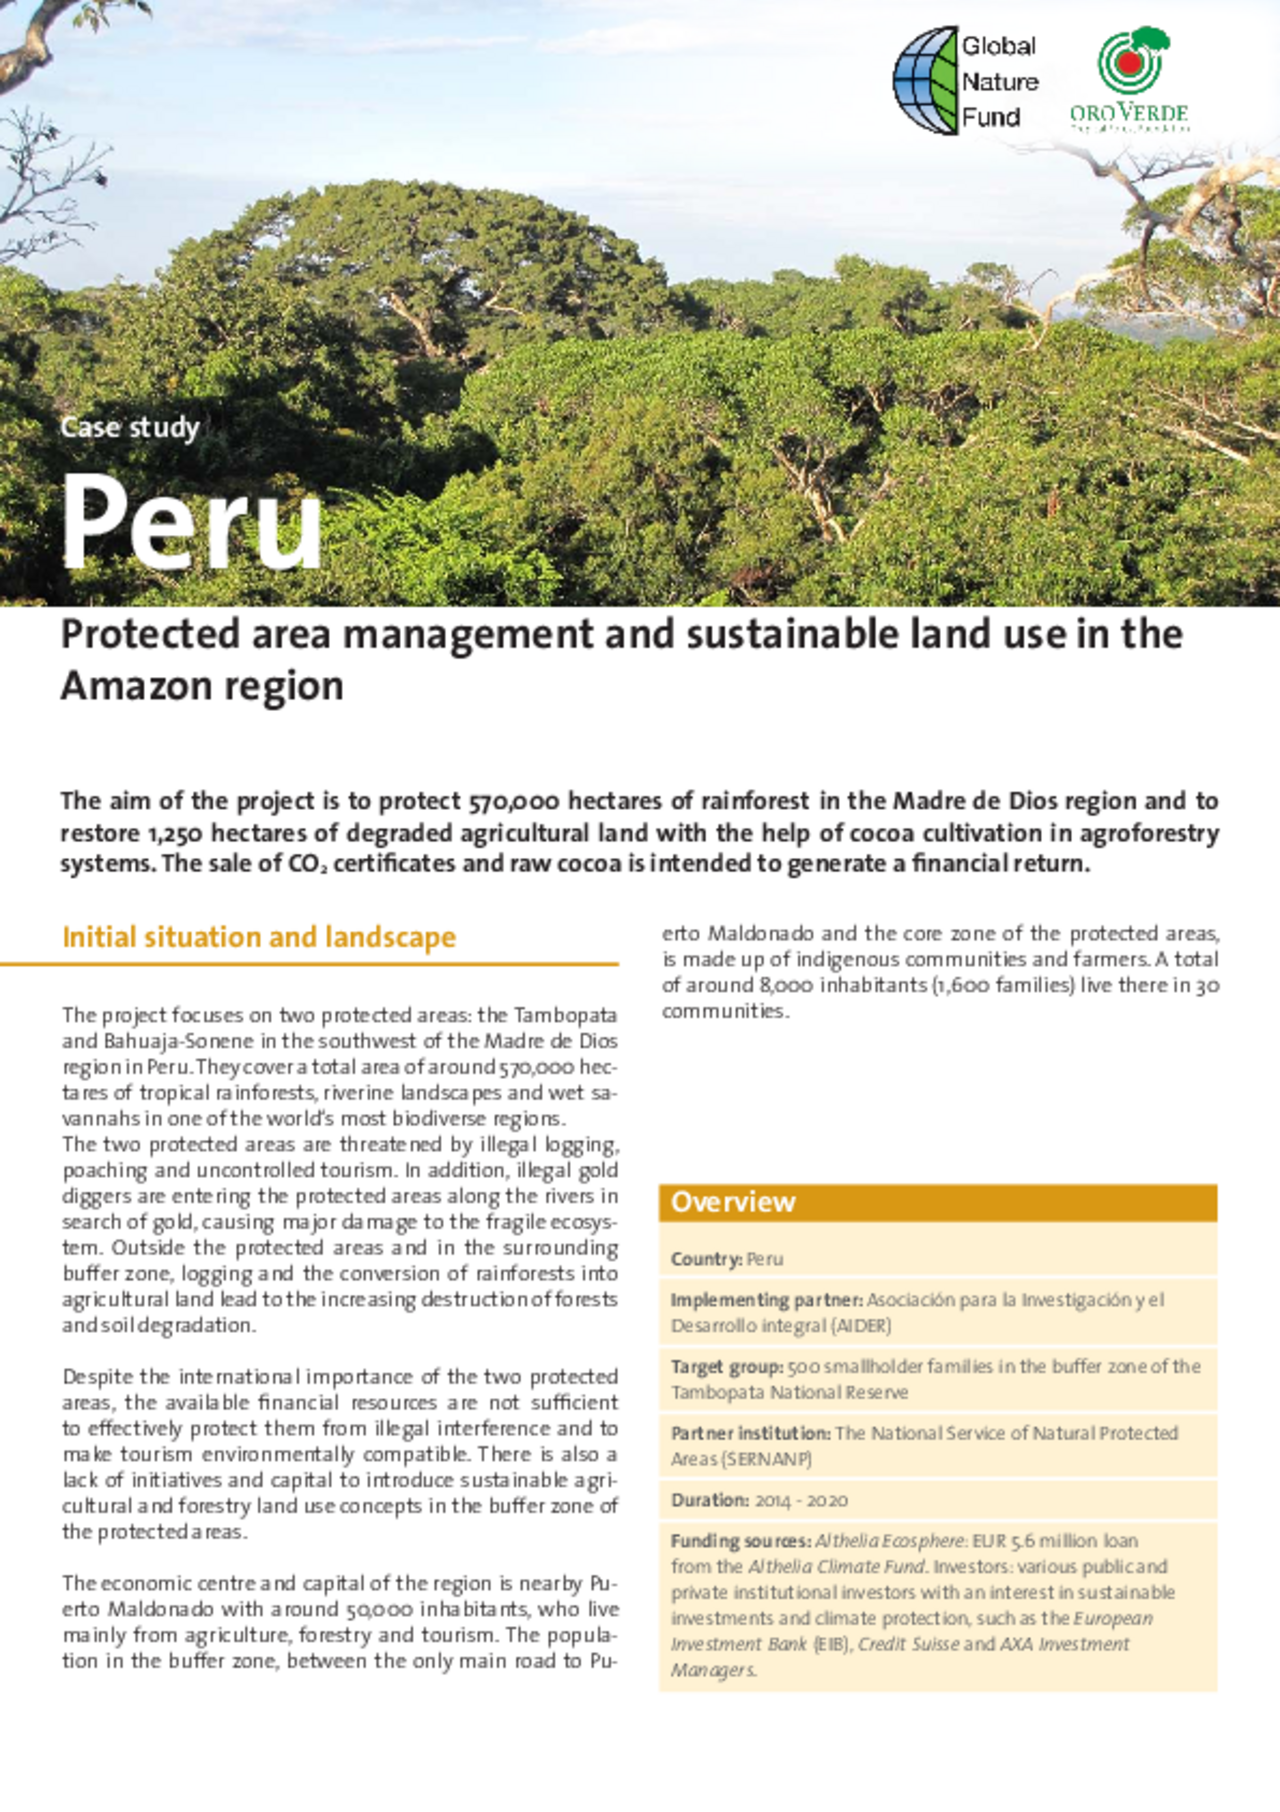 Case Study Peru: Protected area management and sustainable land use in the Amazon region